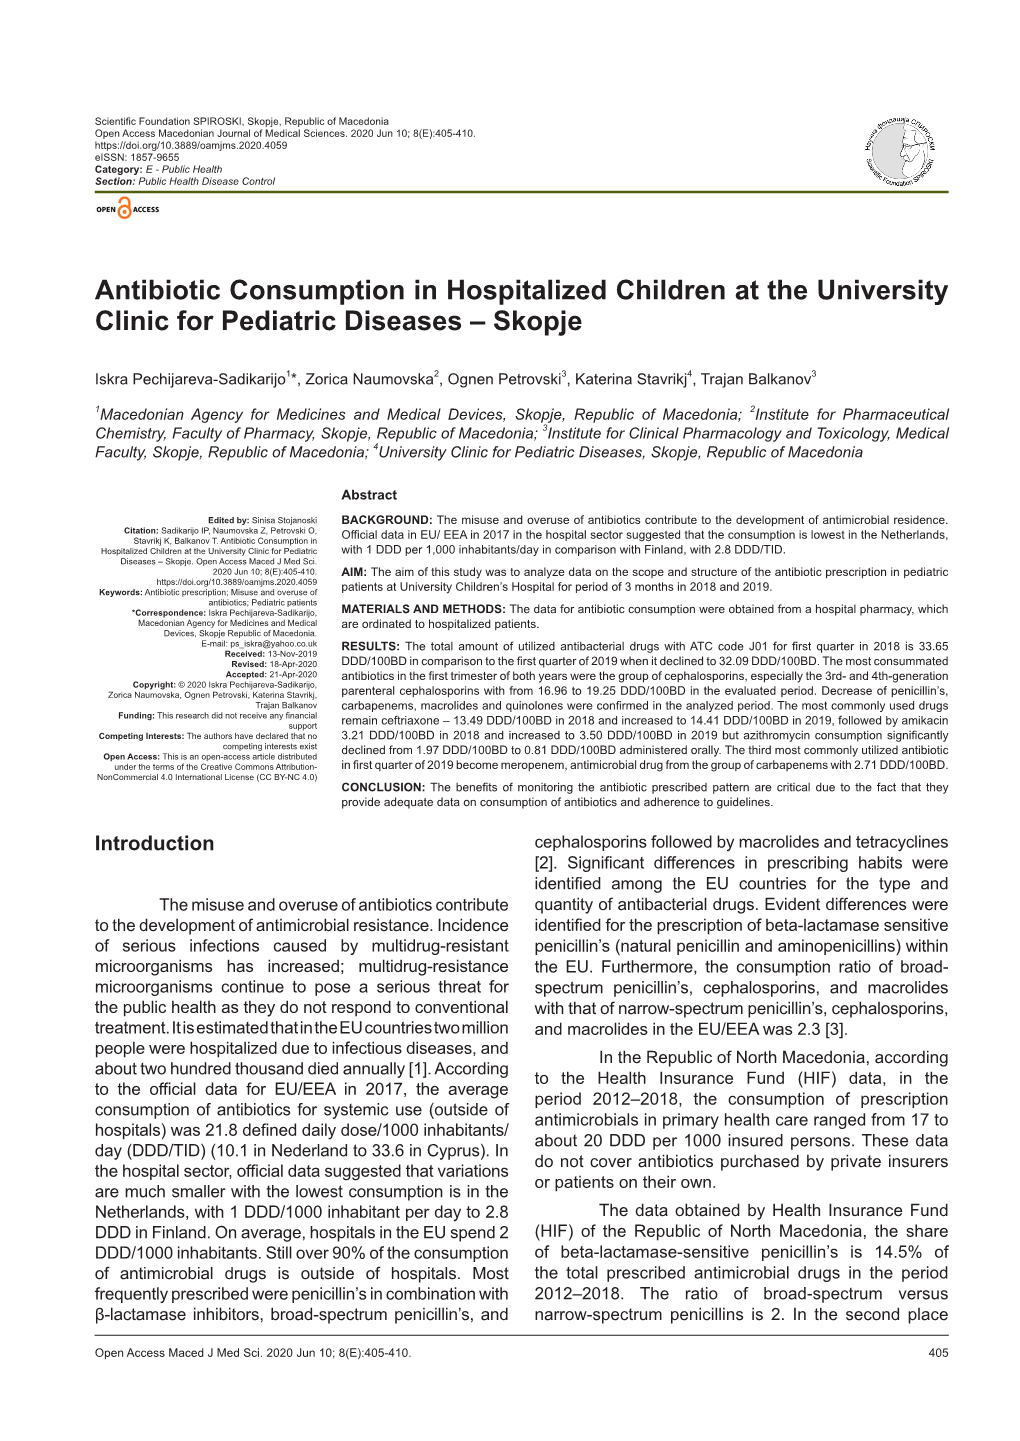 Antibiotic Consumption in Hospitalized Children at the University Clinic for Pediatric Diseases – Skopje